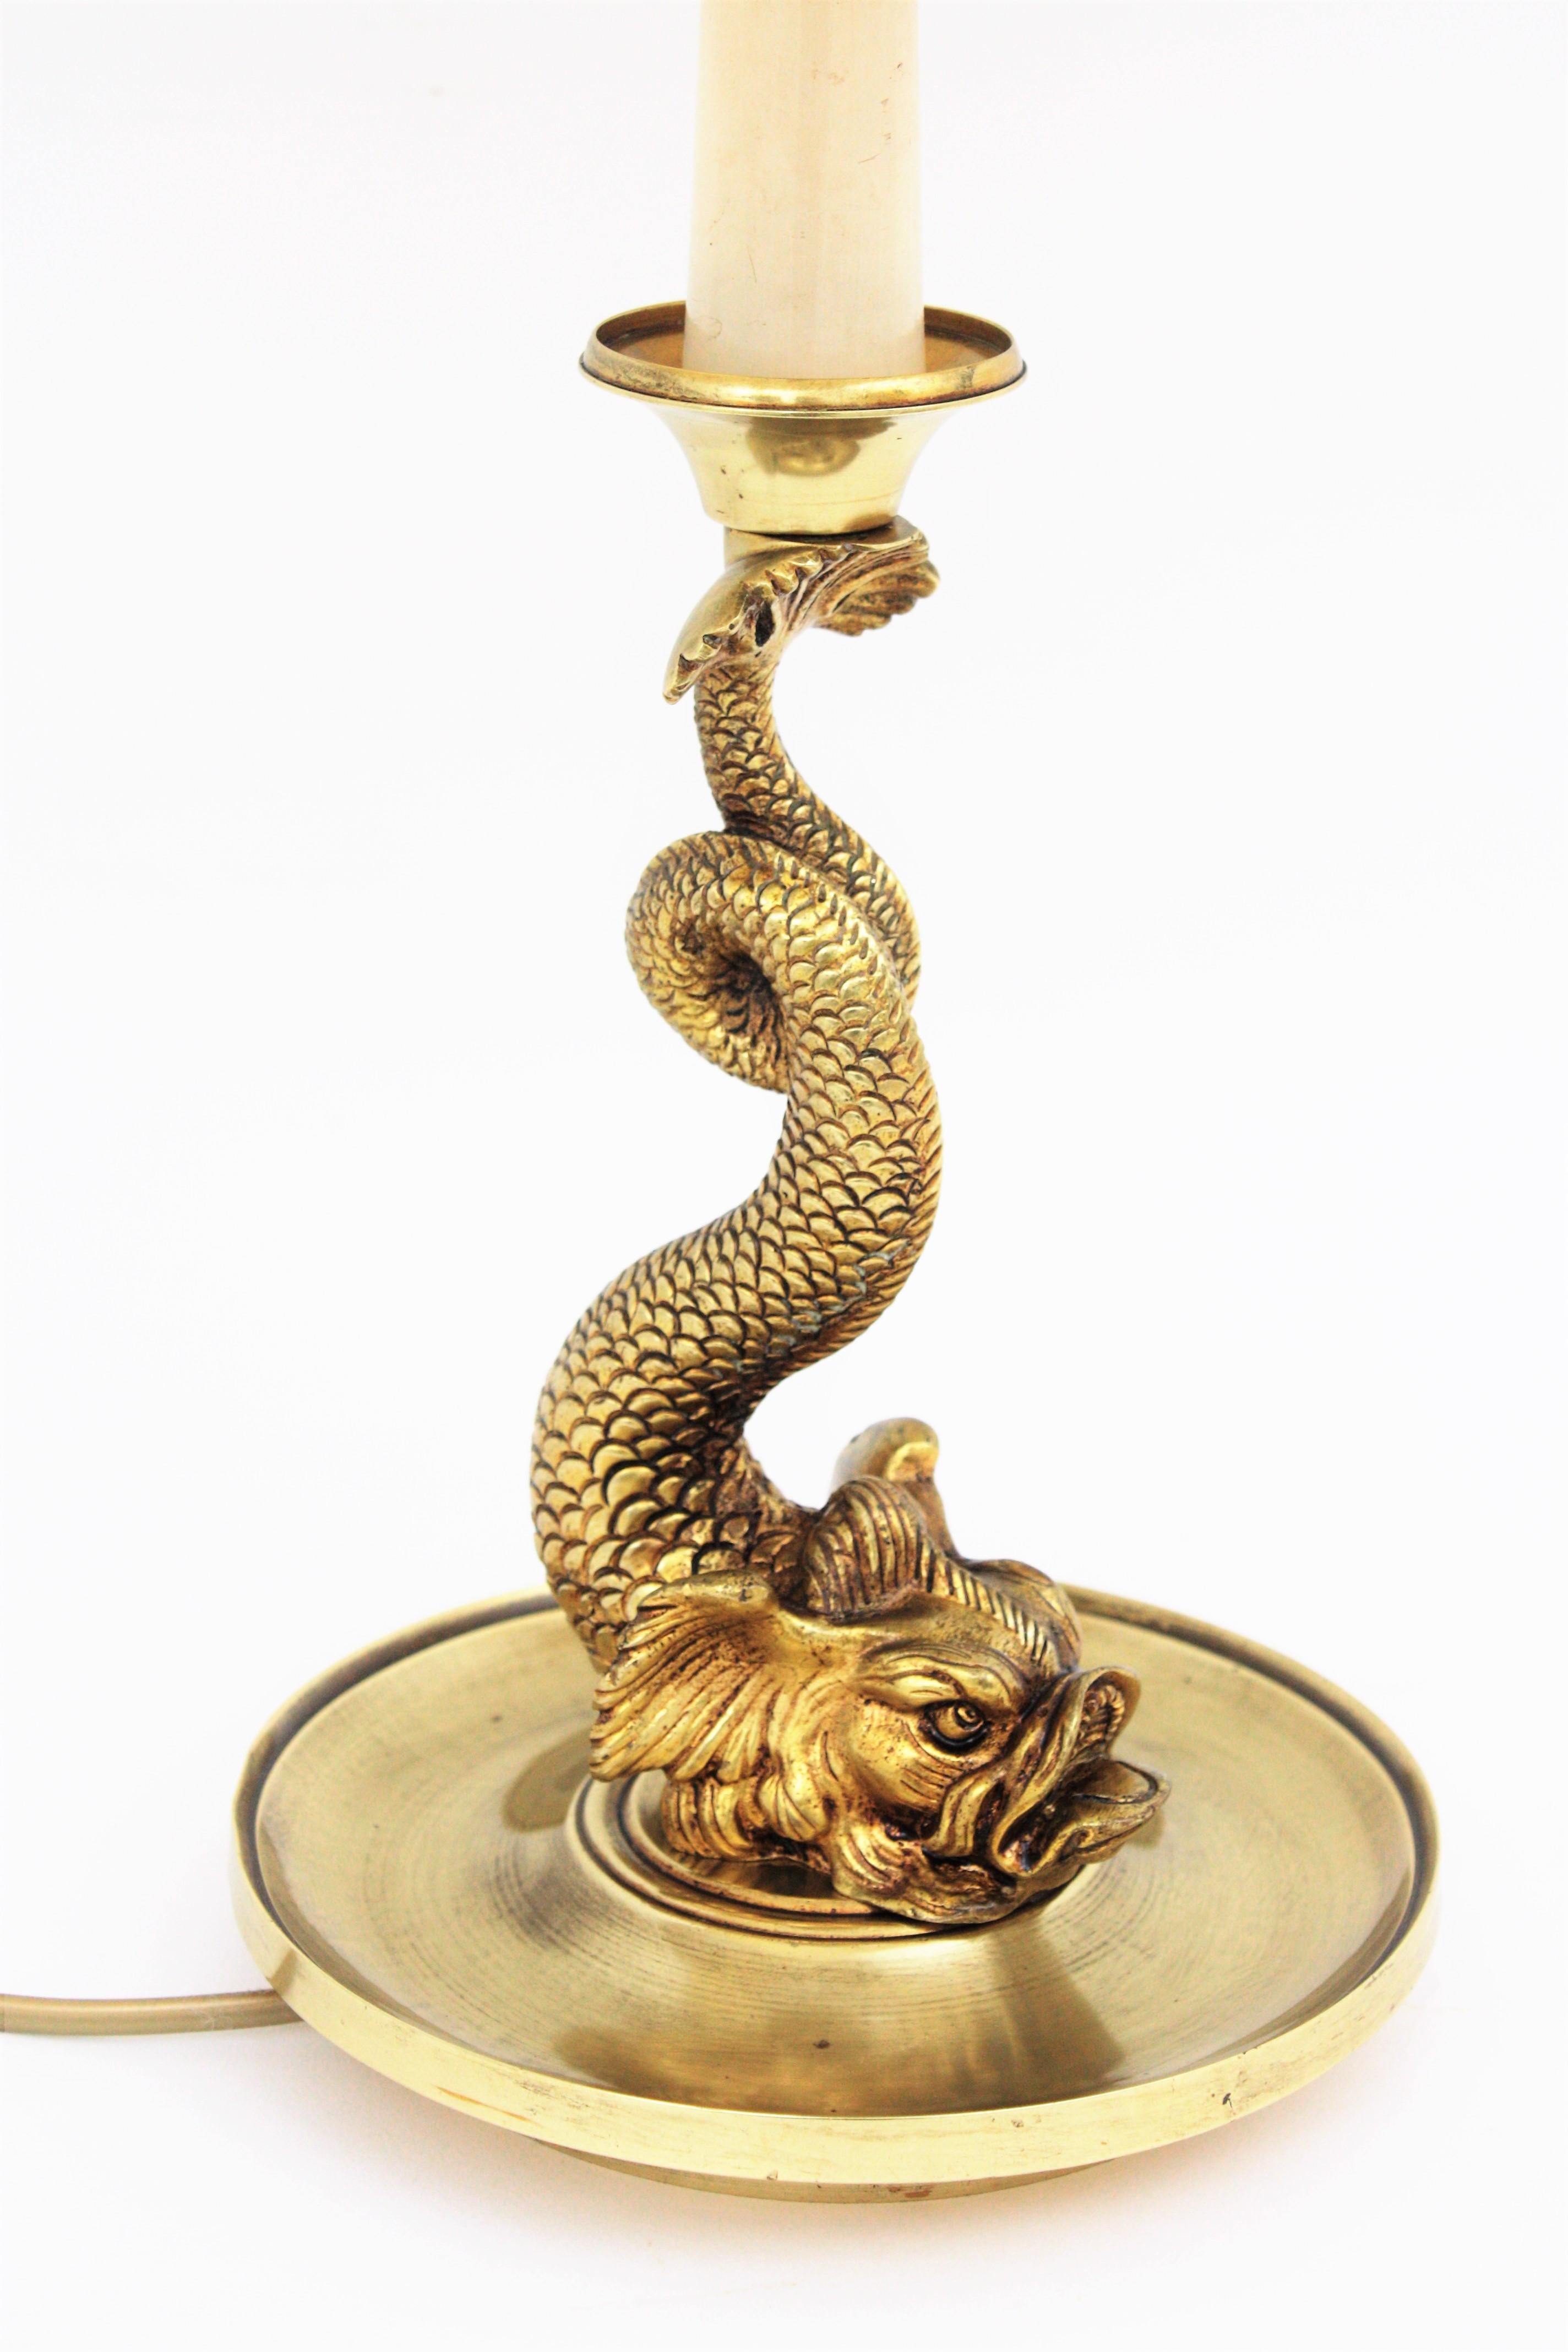 Cast French Mid-Century Modern Koi Fish Brass Table Lamp or Desk Lamp with Shade